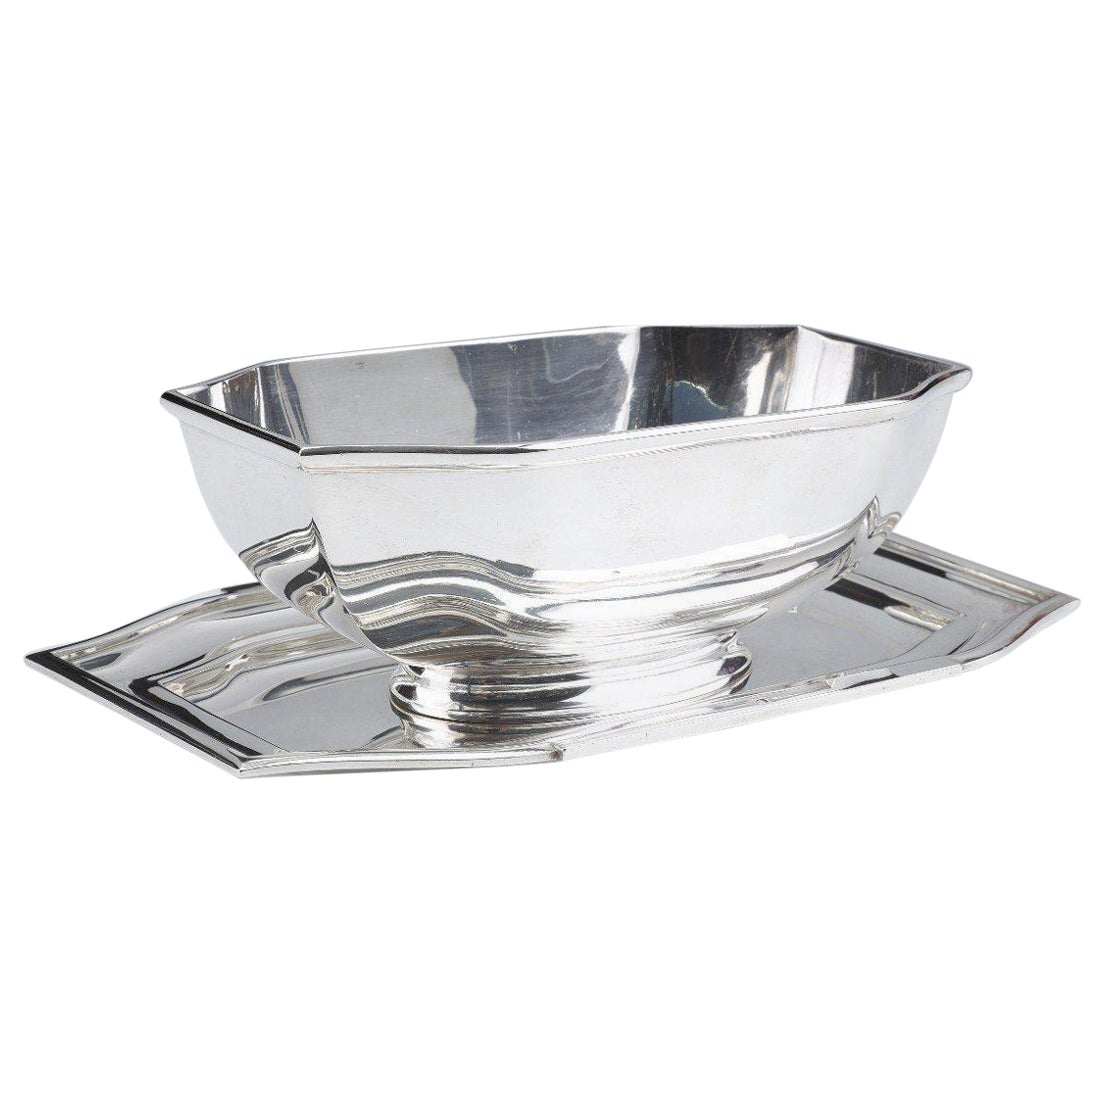 Goldsmith Cardeilhac - Sauceboat On Its Adherent Tray In Silver Art Deco Period For Sale